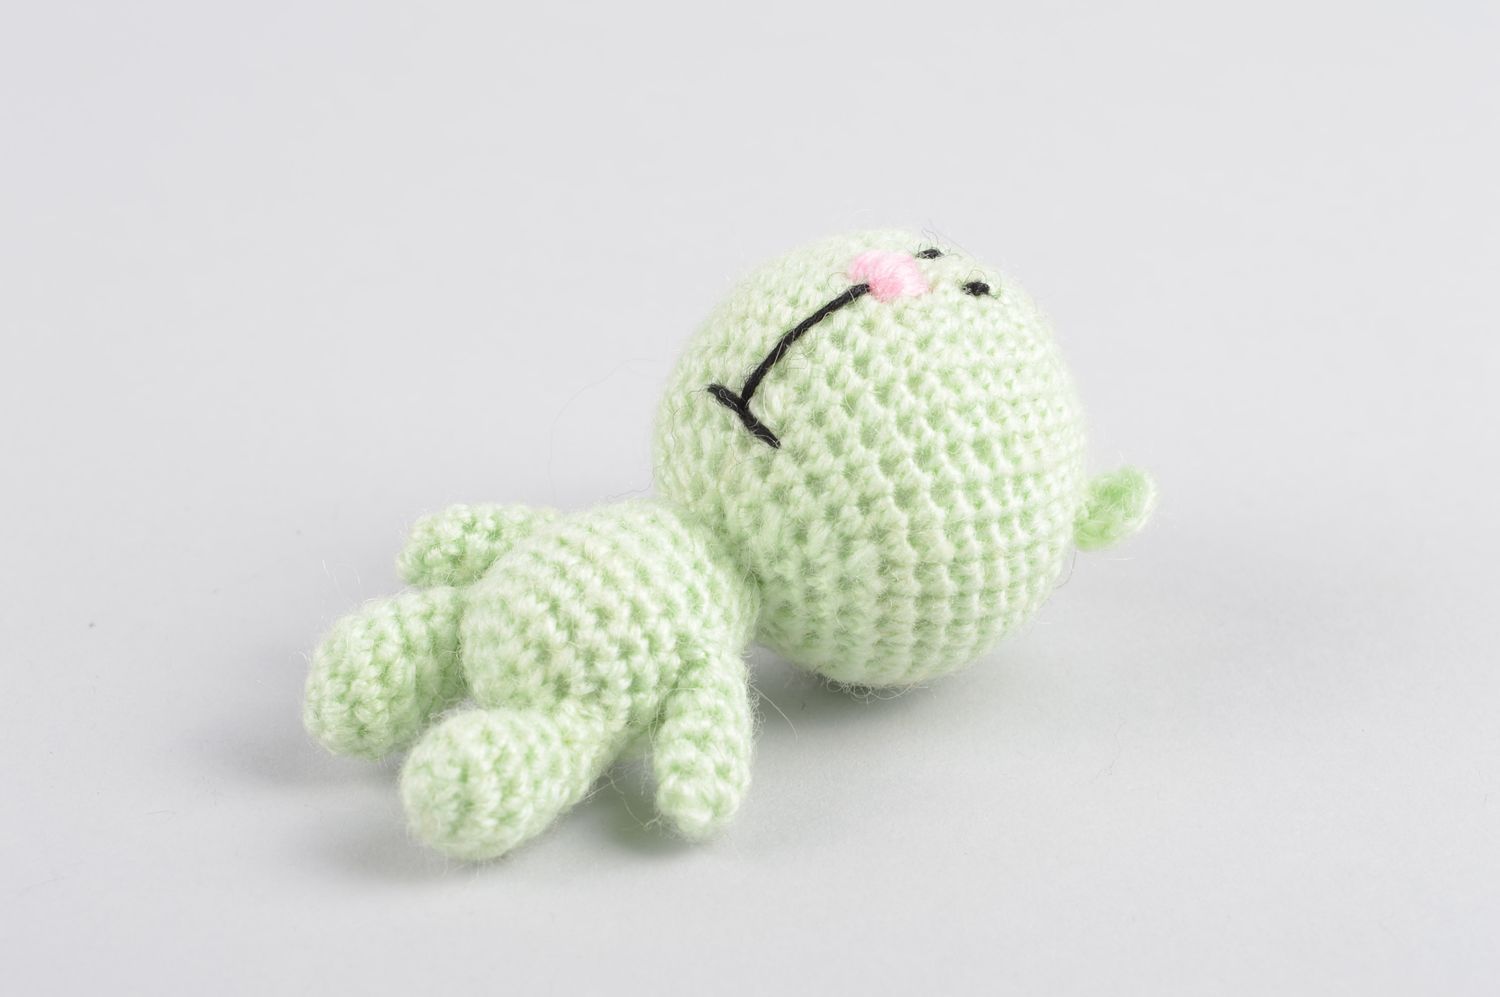 Beautiful handmade soft toy cute toys crochet toy for kids cool room ideas photo 3